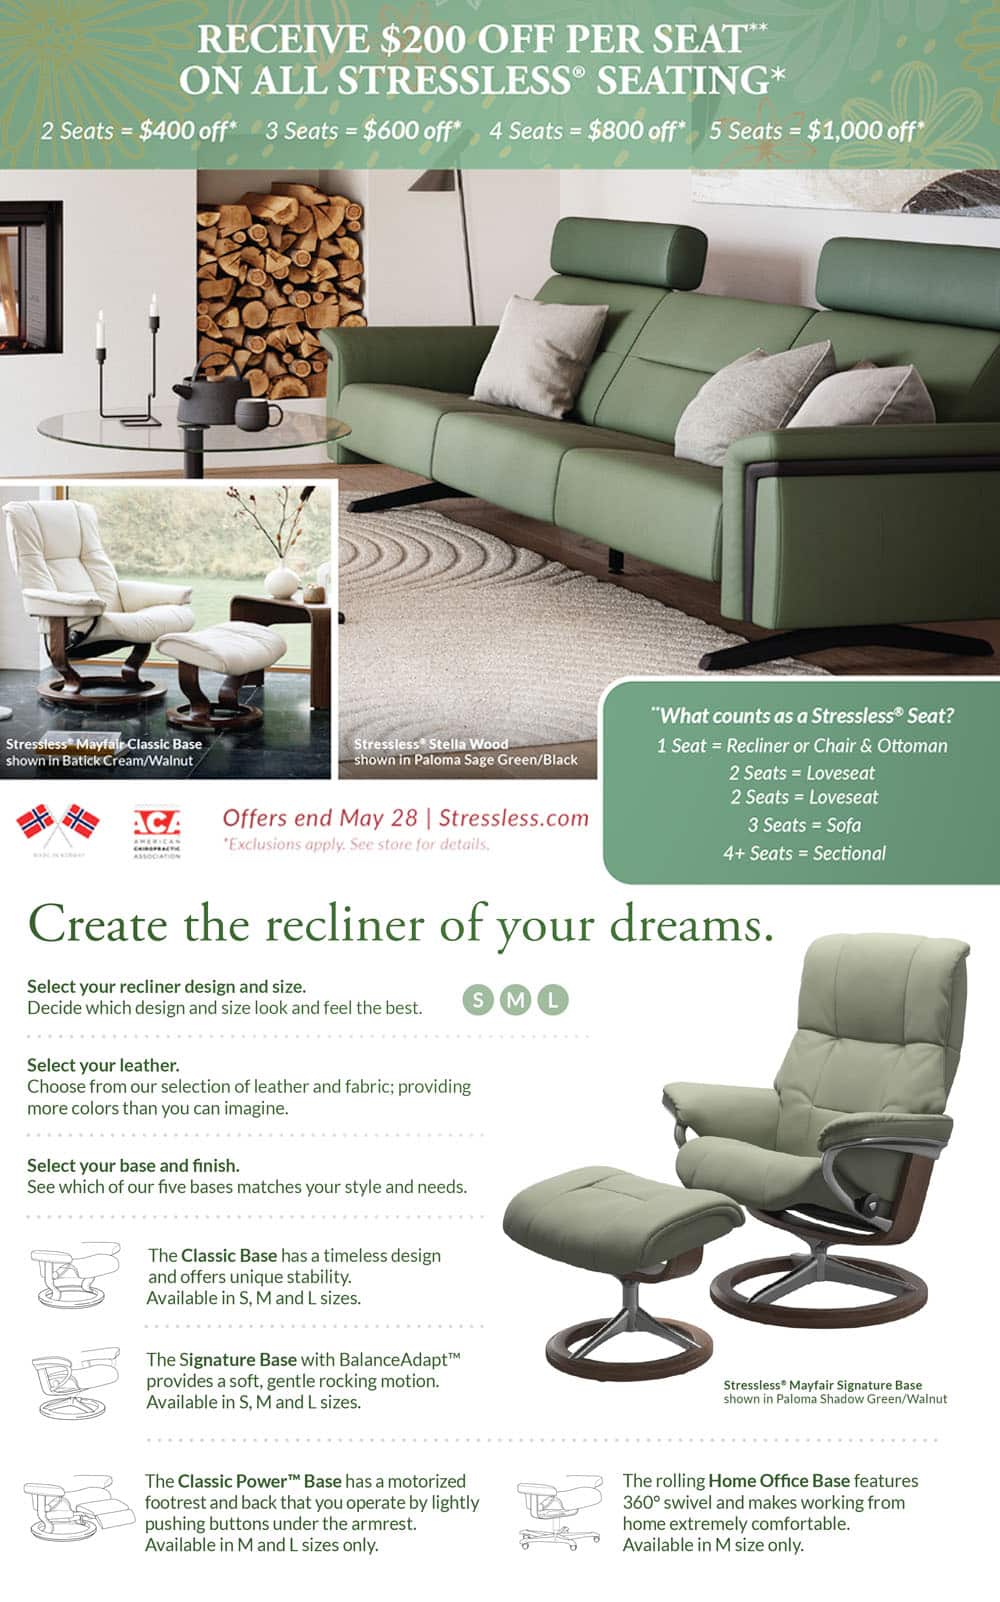 Receive up to $1000 off discount on all stressless seating at San Francisco Design in Salt Lake City and Park City Utah